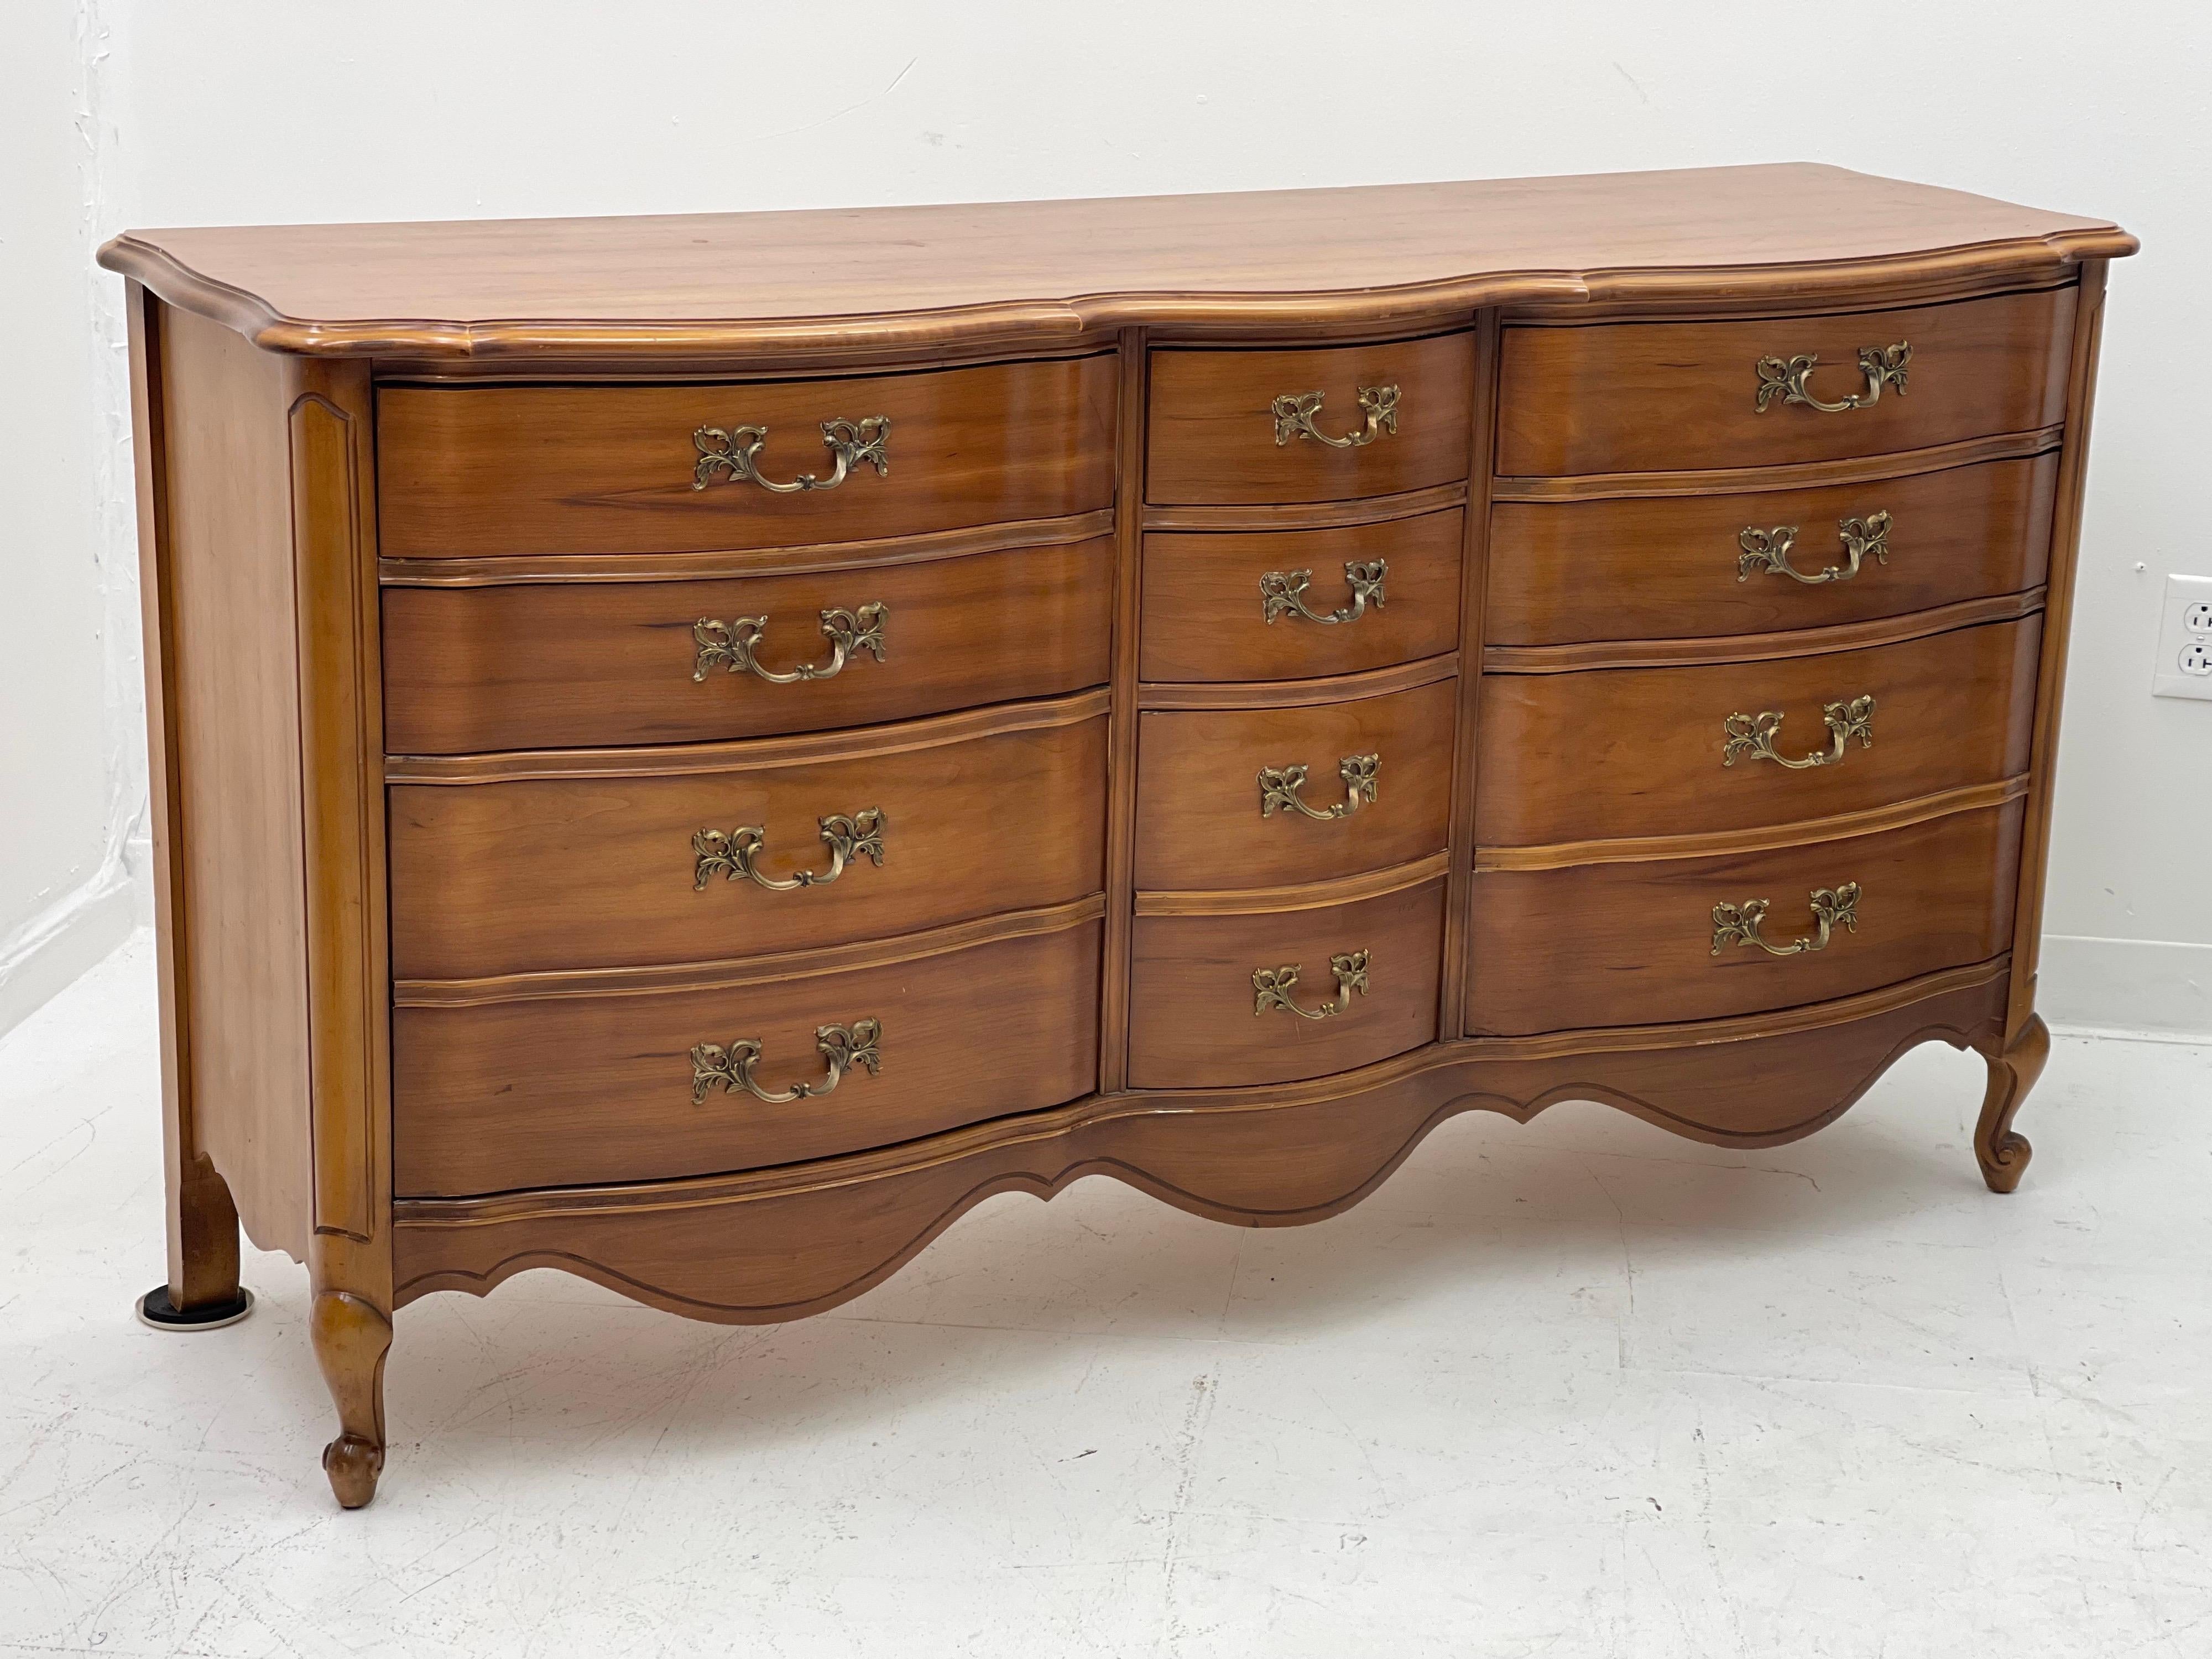 Vintage French Provincial Dresser or Credenza with Dovetailed Drawers 2